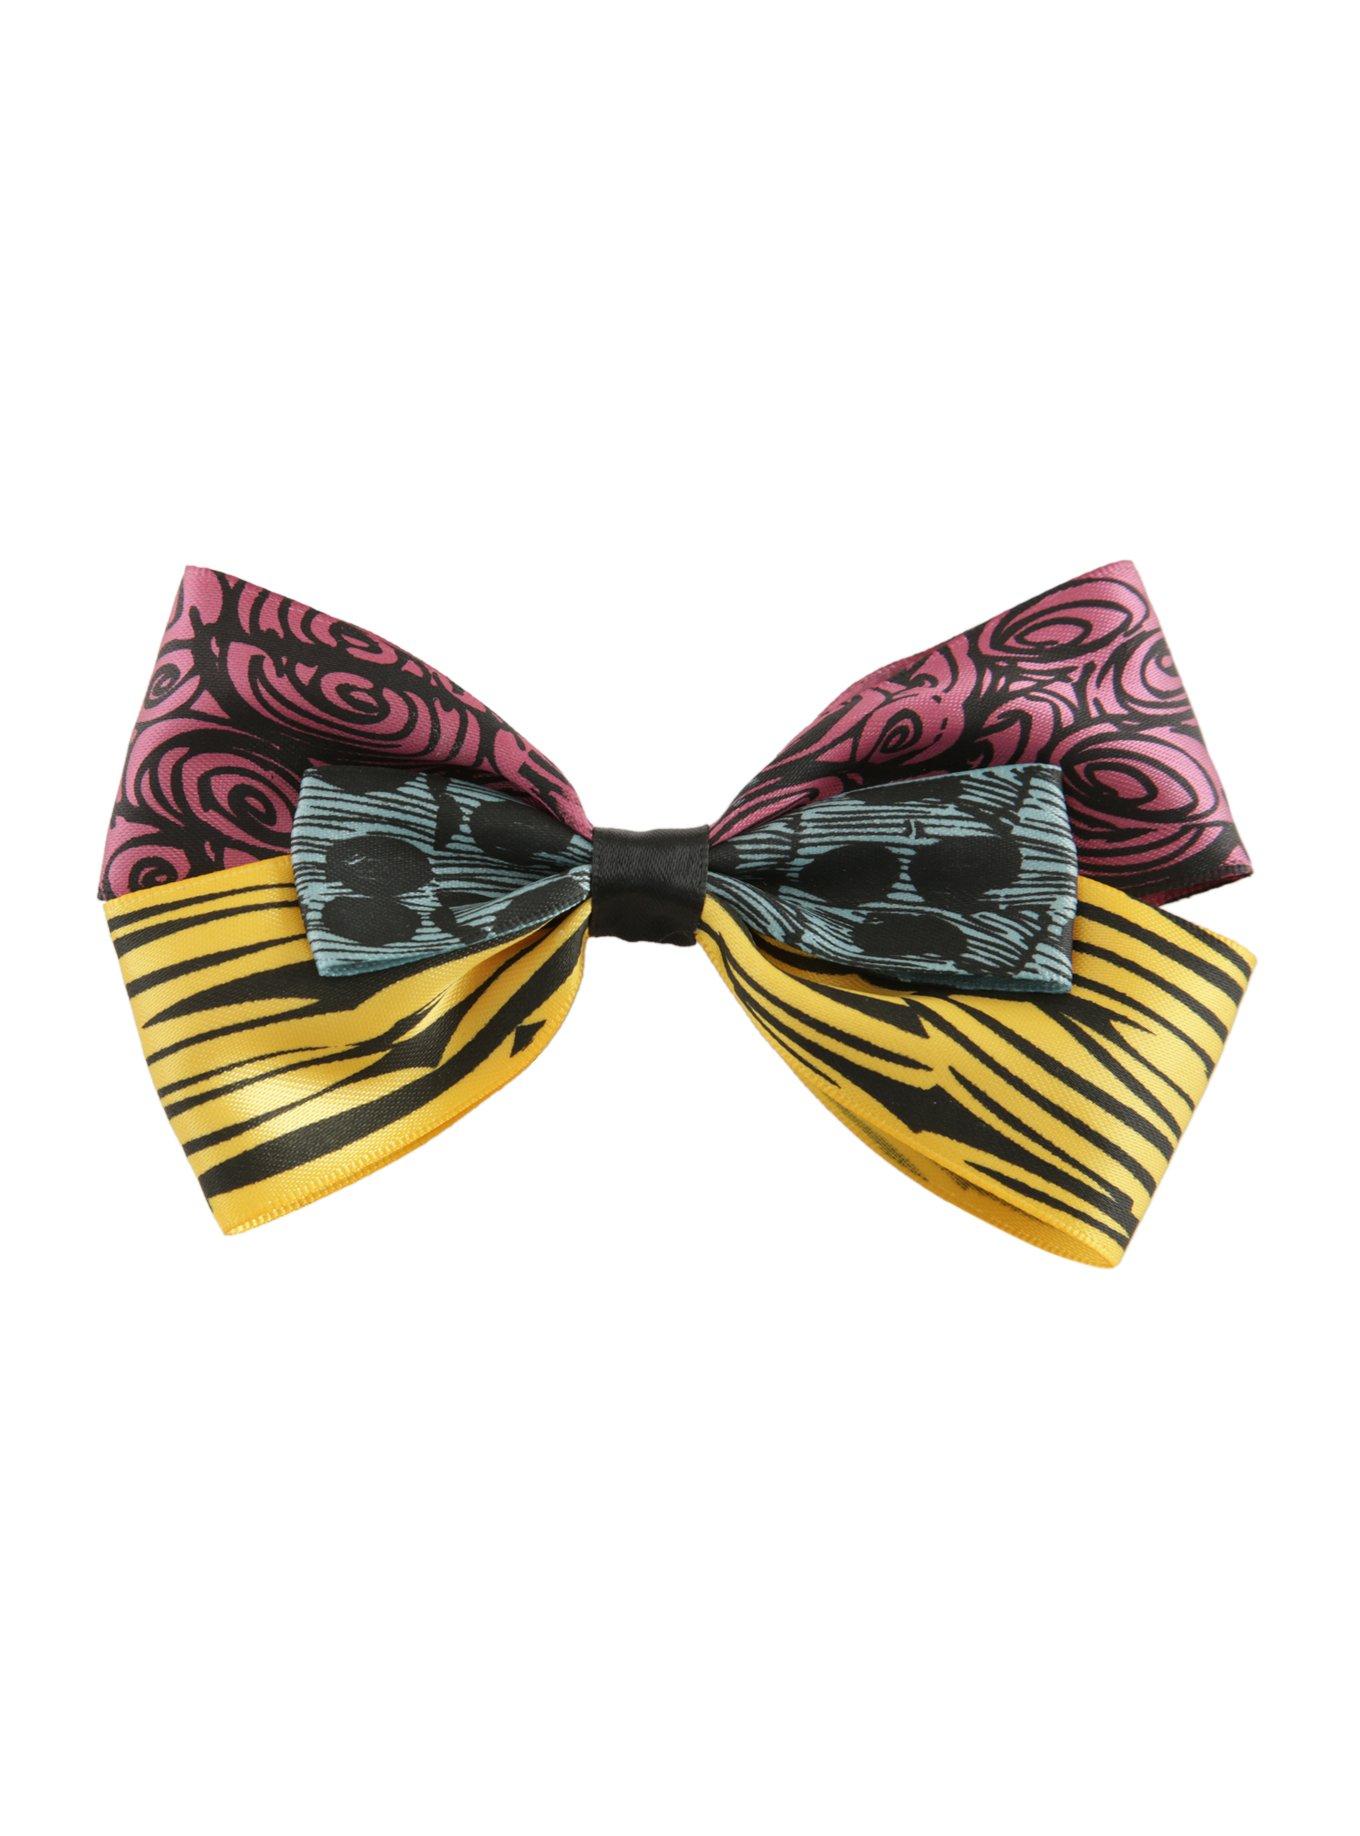 Nightmare before Christmas Bow Sally by Inspired Bows 